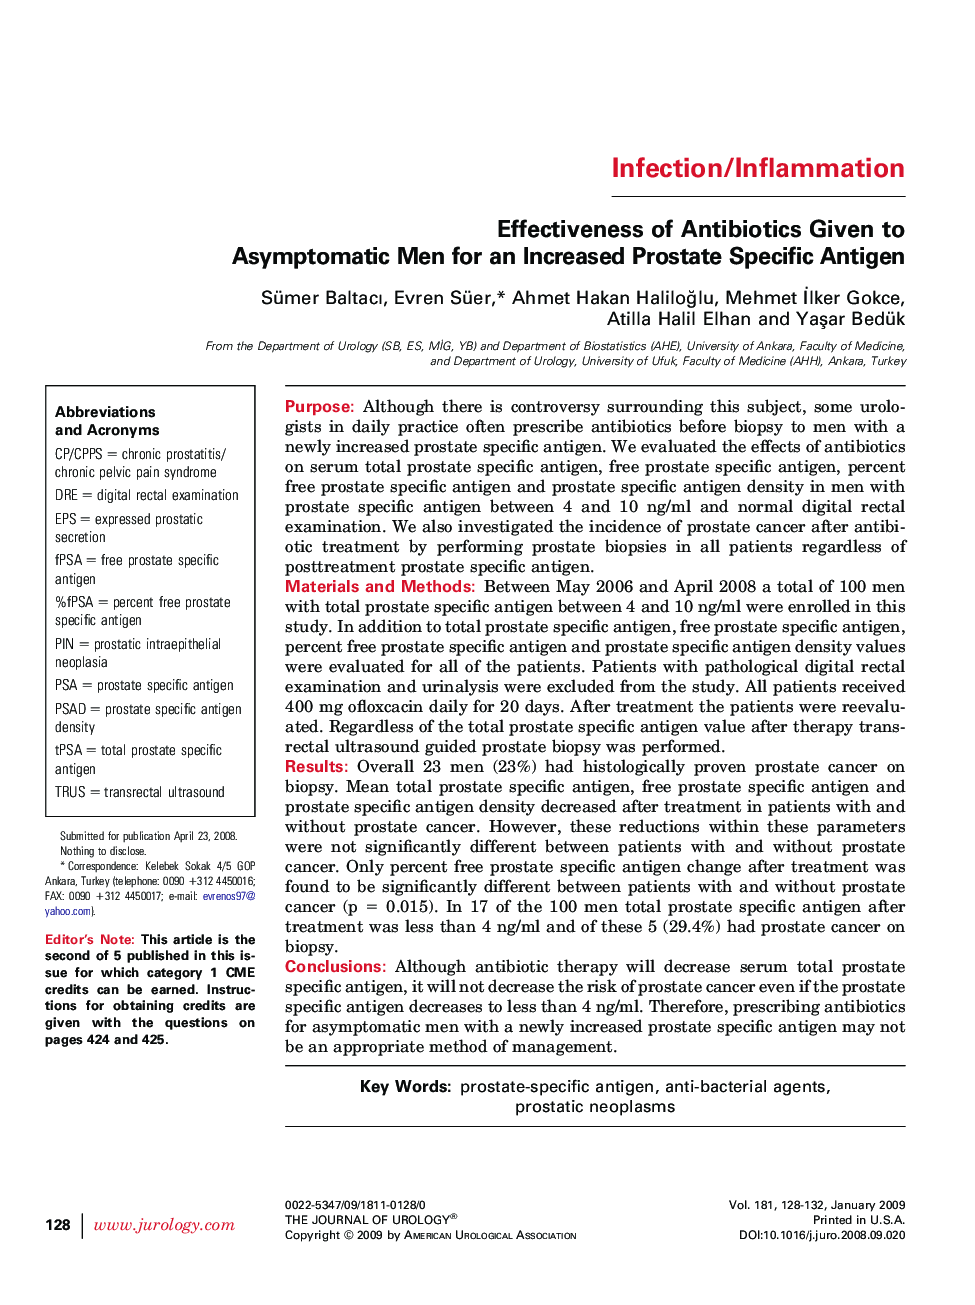 Effectiveness of Antibiotics Given to Asymptomatic Men for an Increased Prostate Specific Antigen